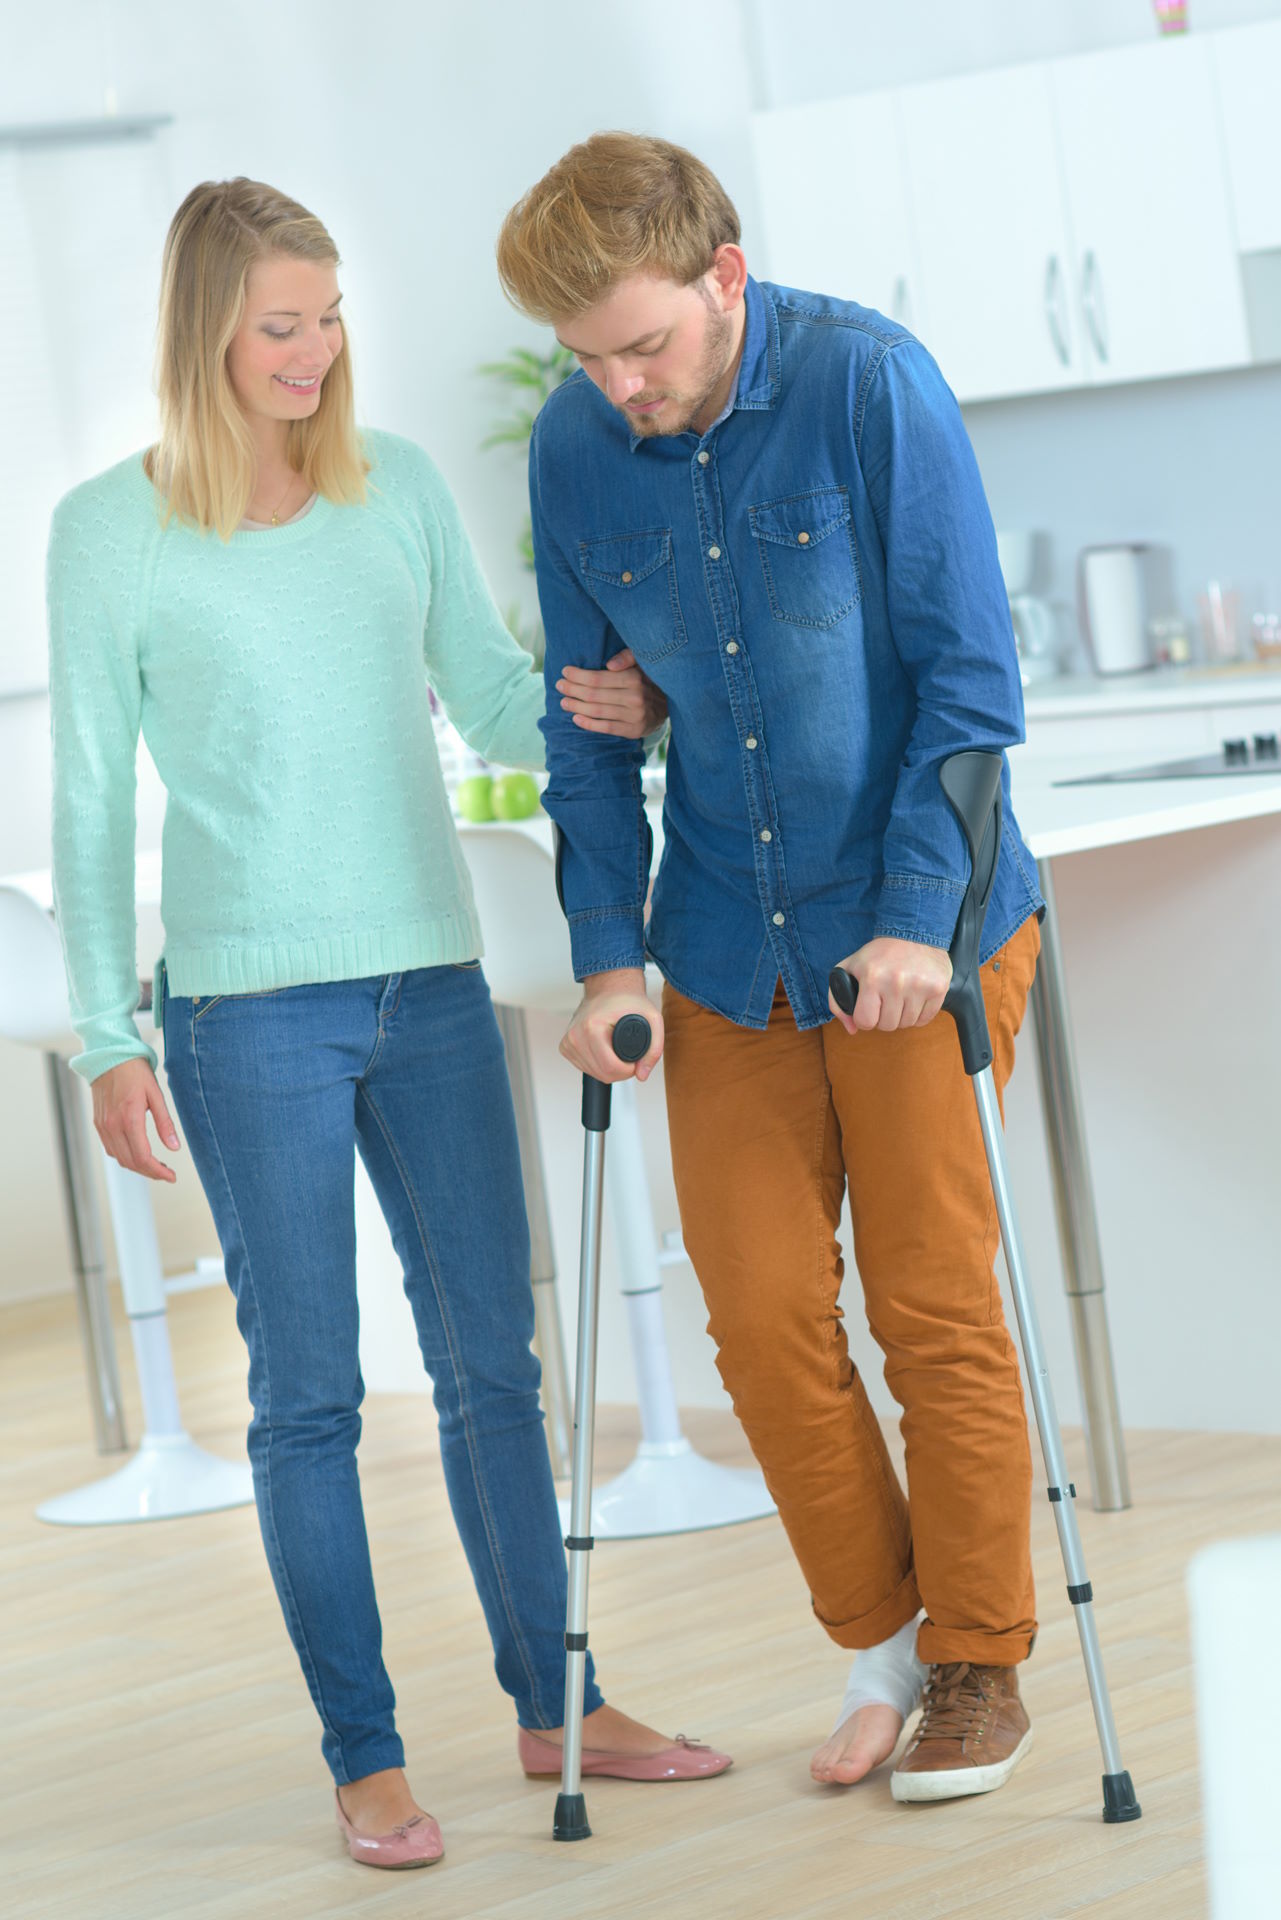 woman helping a man with crutches